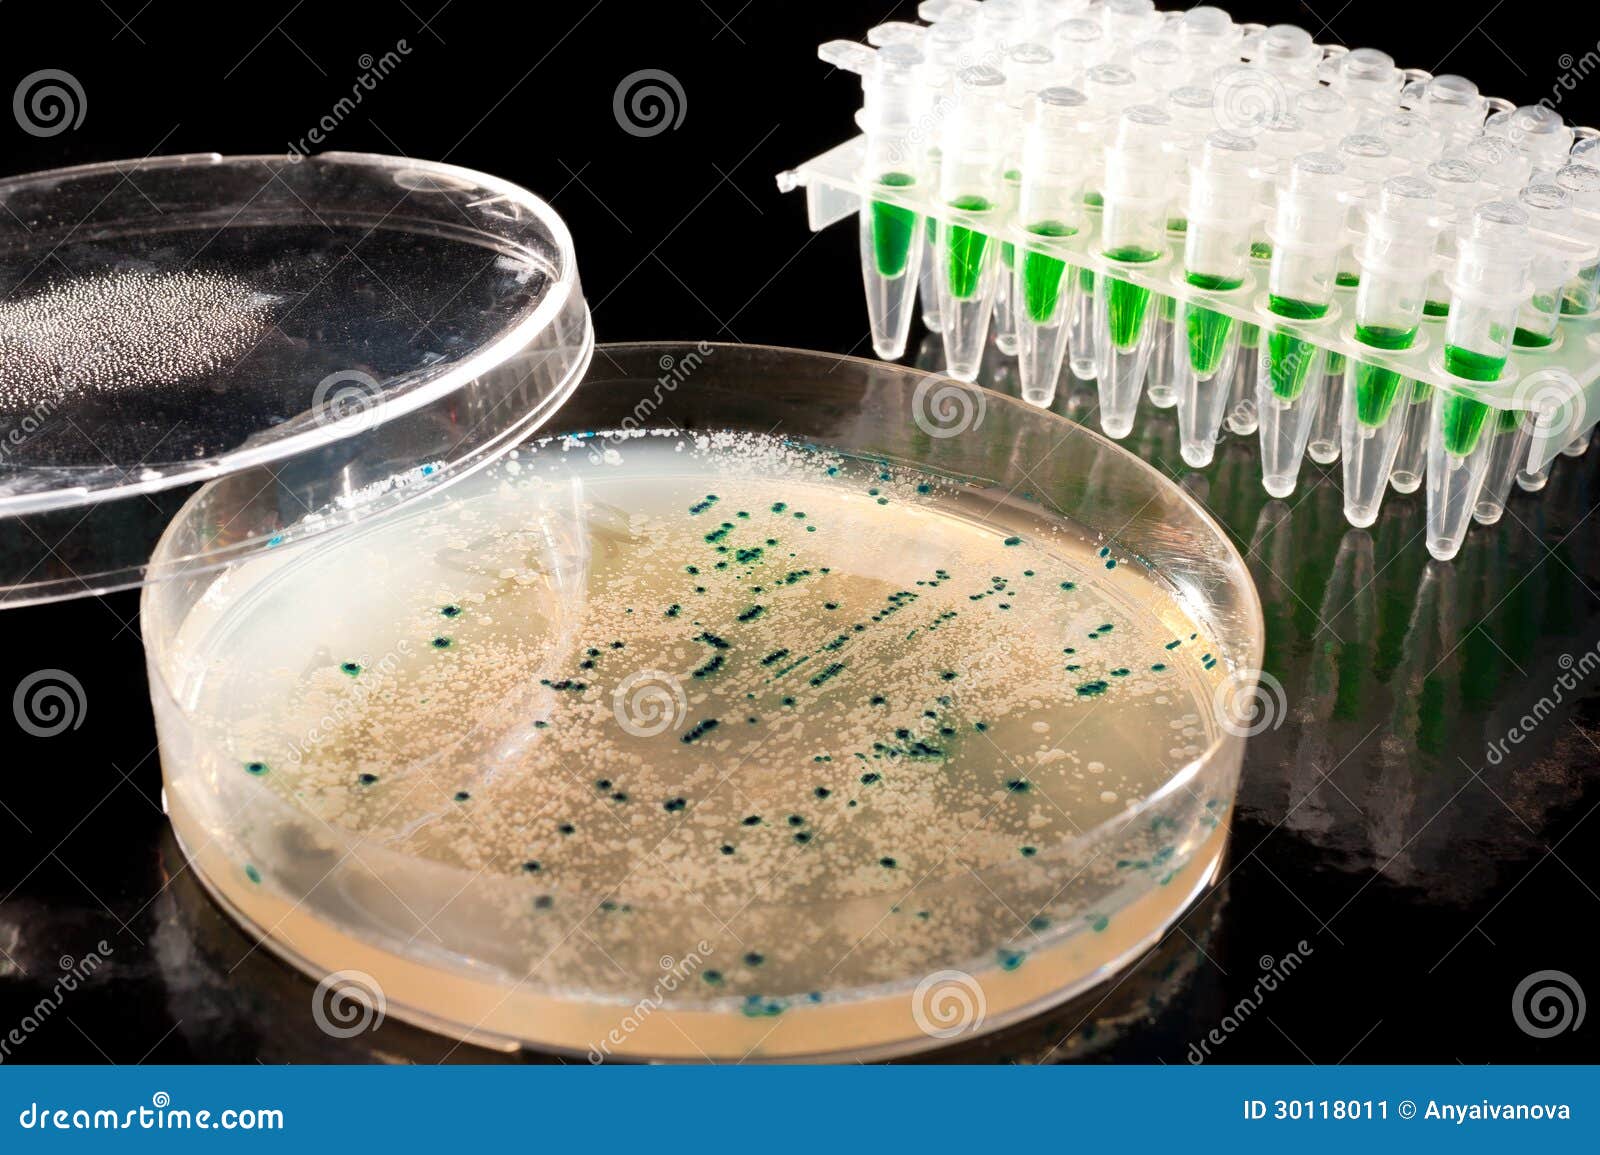 Picking Up Bacterial Colonies from Agar Plate Stock Image - Image of